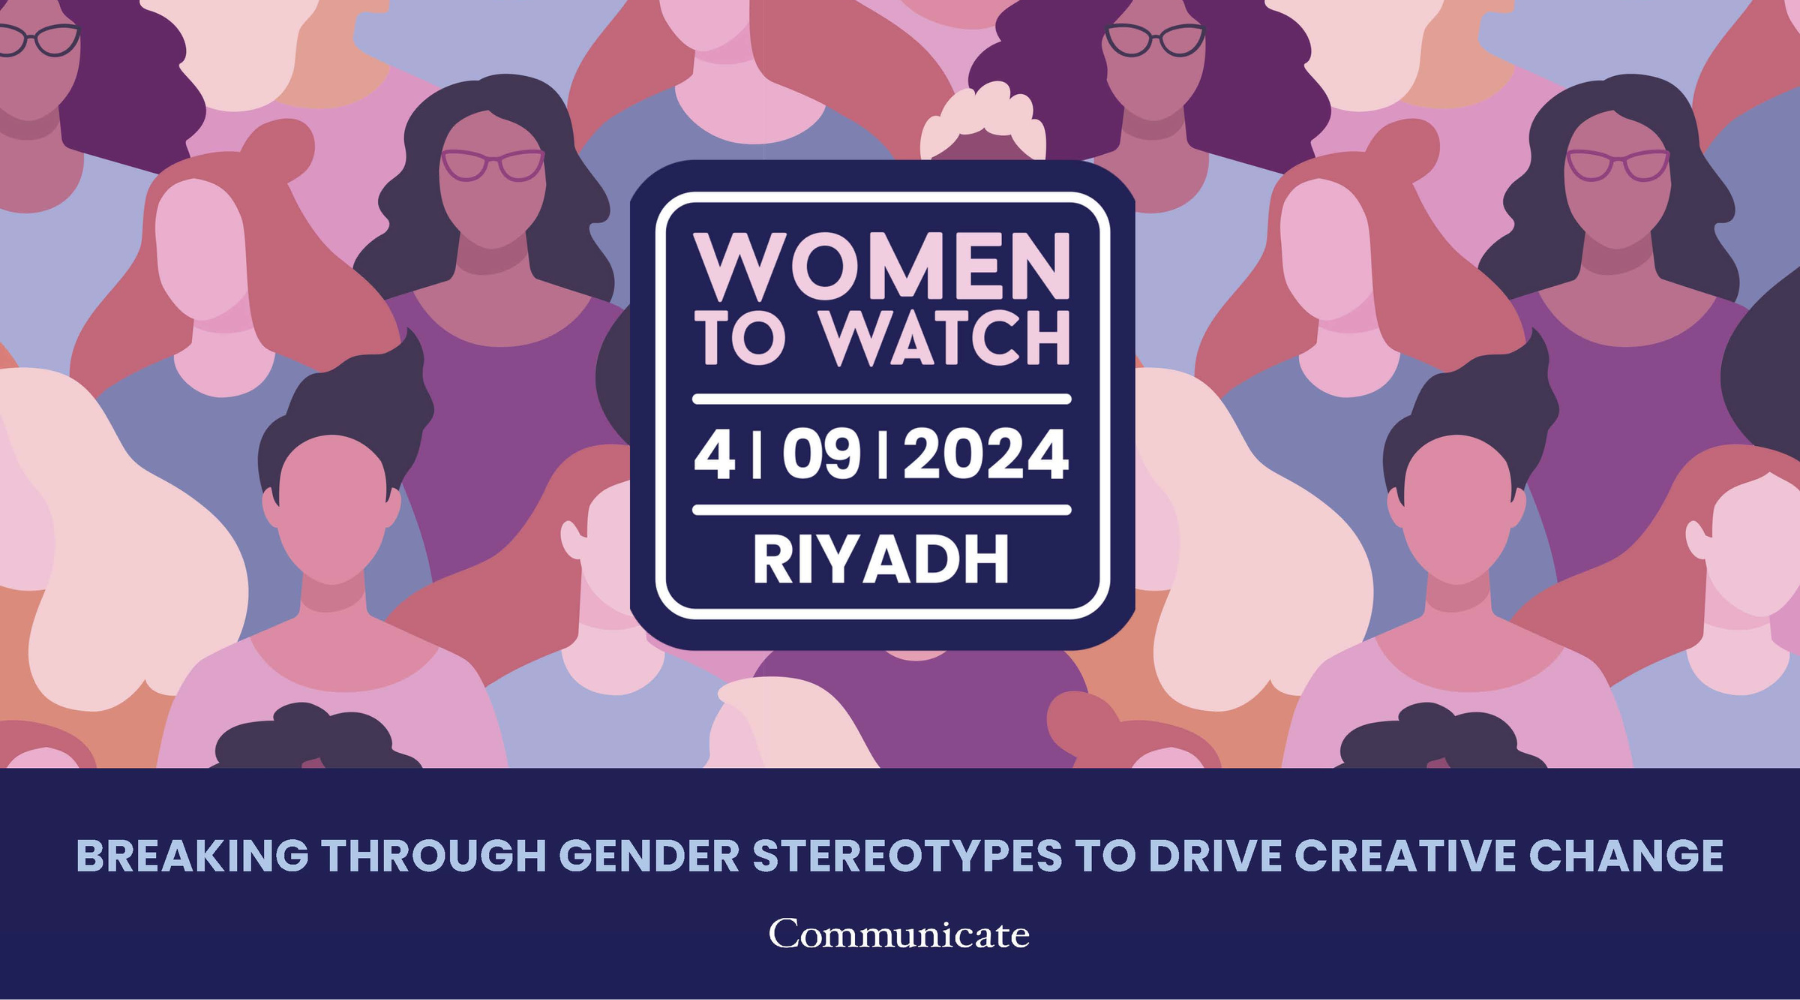 Communicate to Host 2nd Edition of Women to Watch Conference in Riyadh